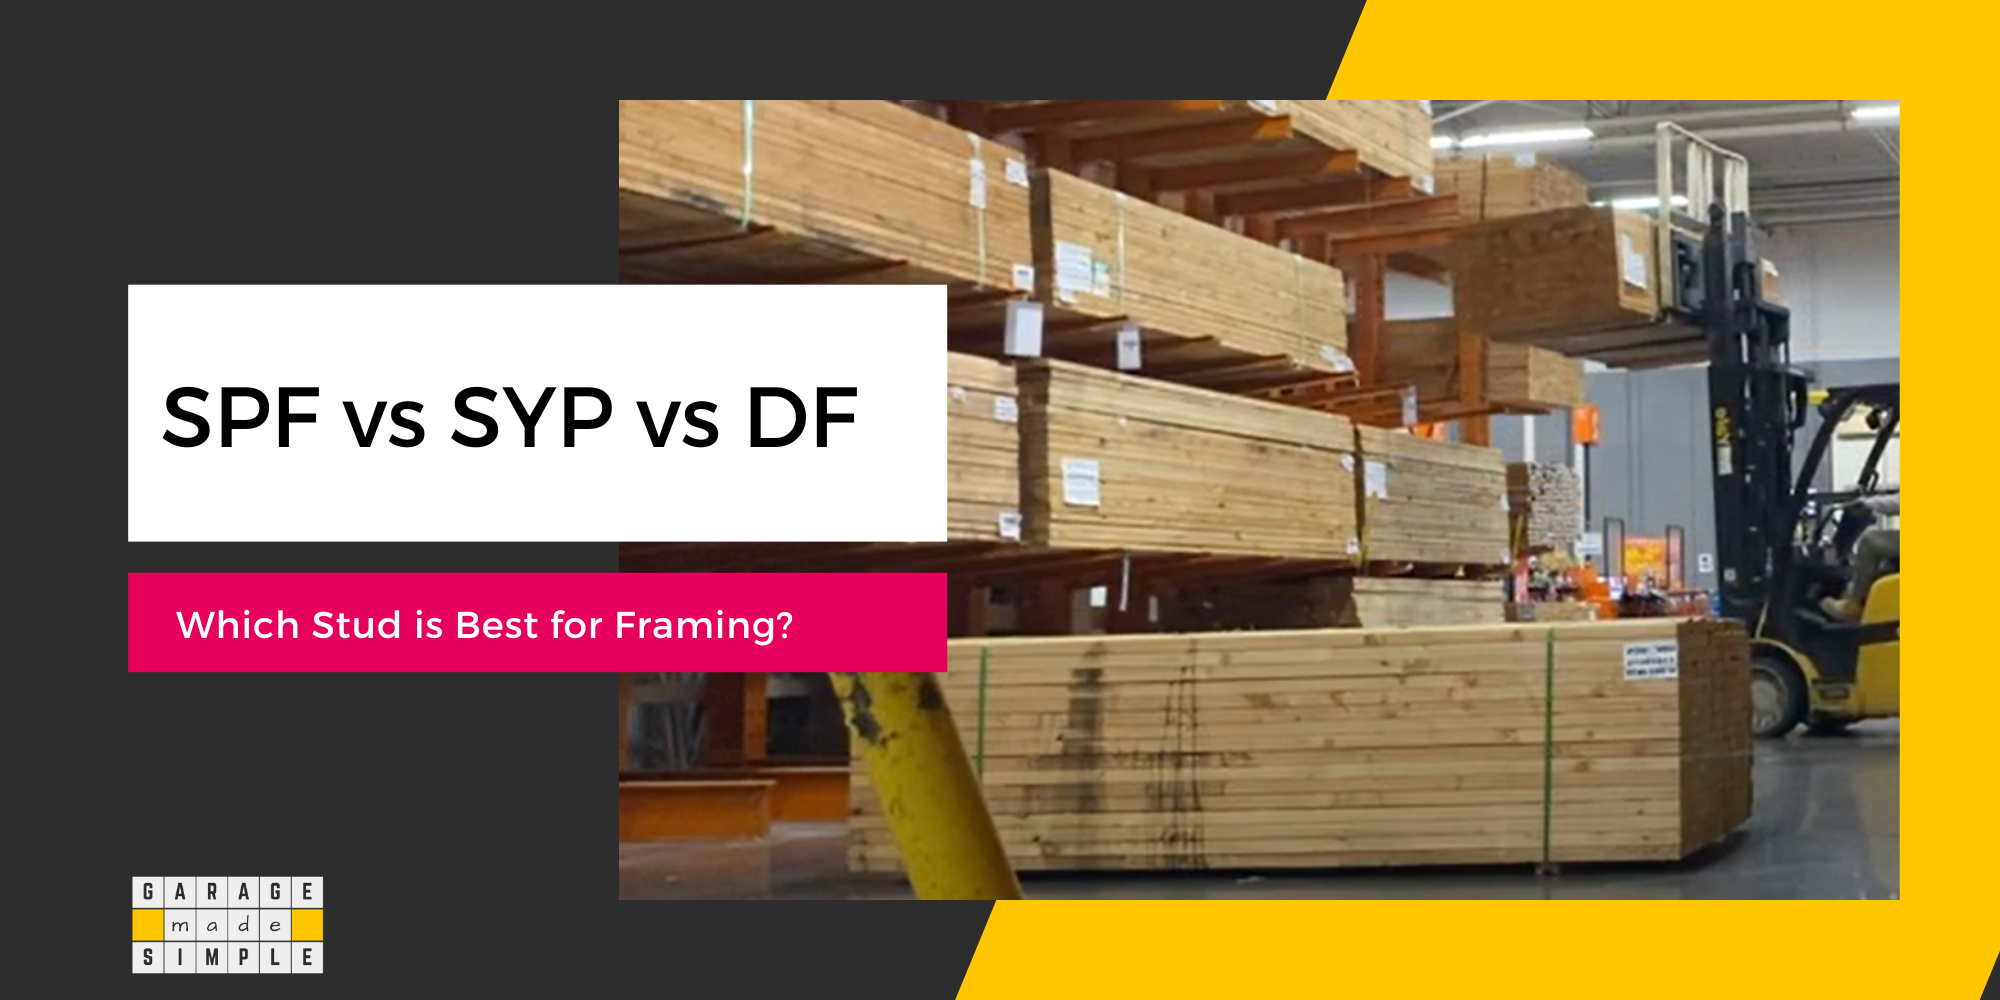 SPF vs SYP vs DF: Which Stud is Best for Framing Garage Walls?